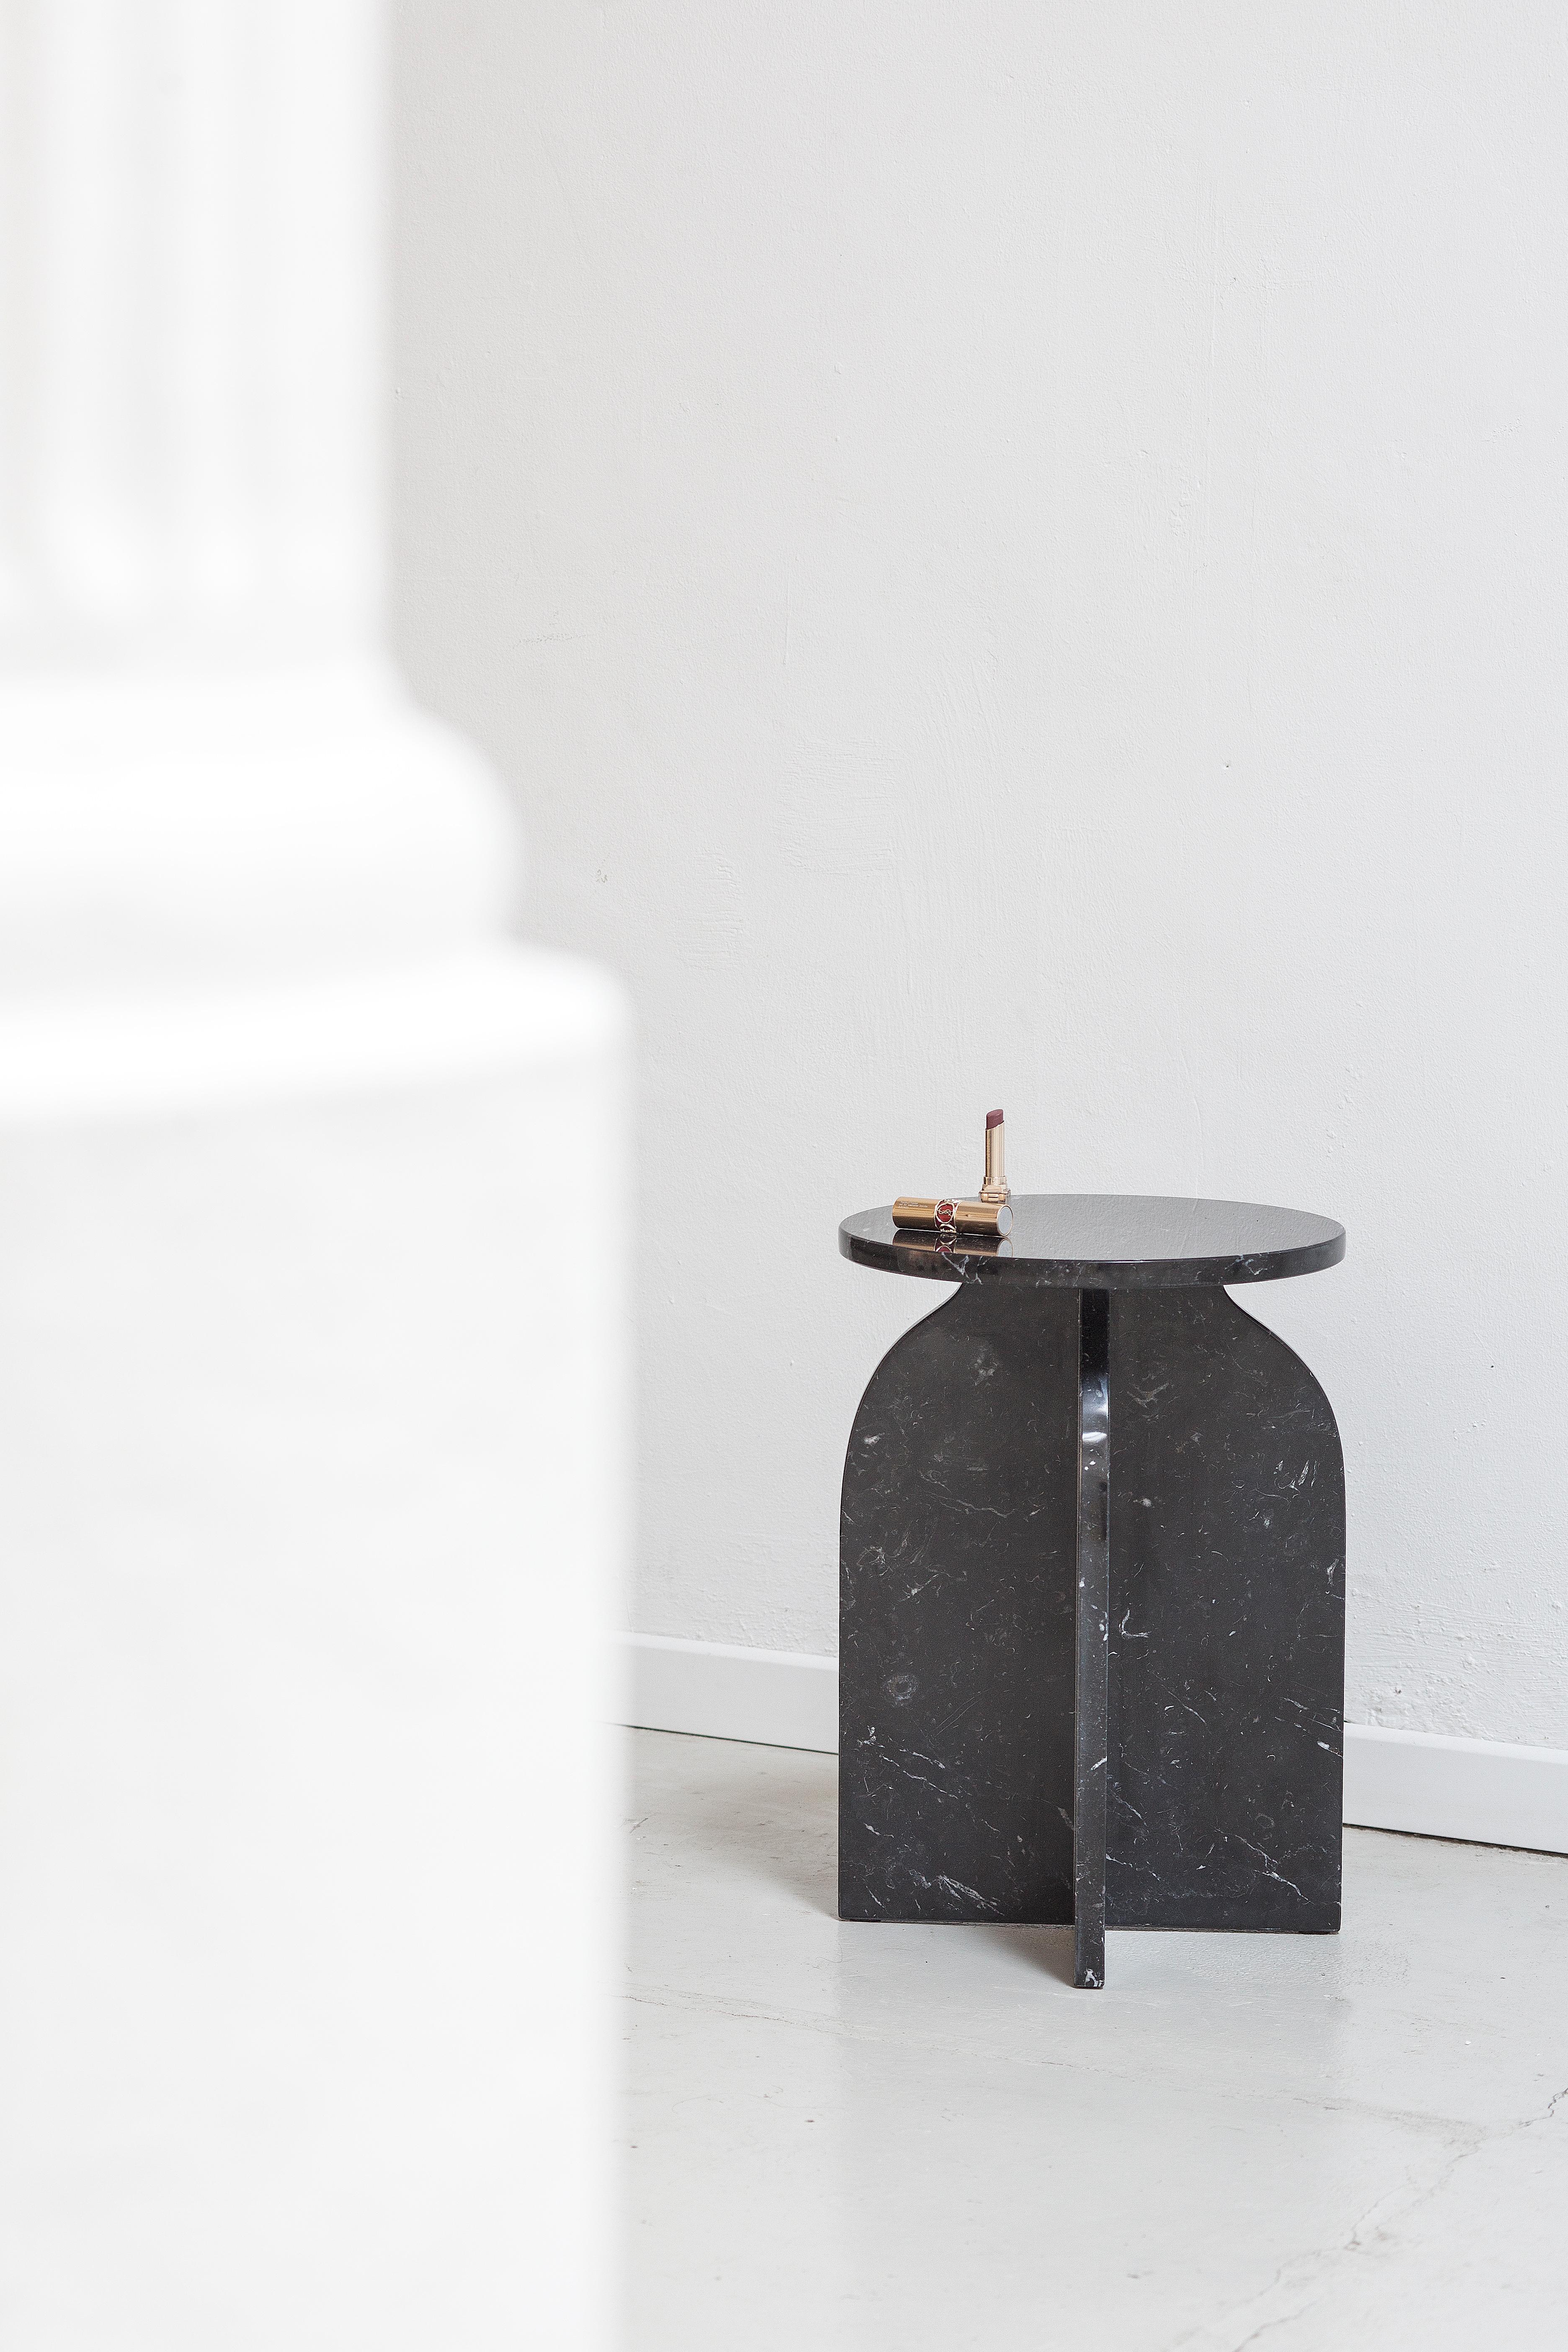 Plus side table by Joseph Vila Capdevila

Material: Marble
Dimensions: 33 x 47 cm
Weight: 19.1kg

Low table composed of a circular envelope of treated marble, supported on four legs of the same material and forming two pointed arches in